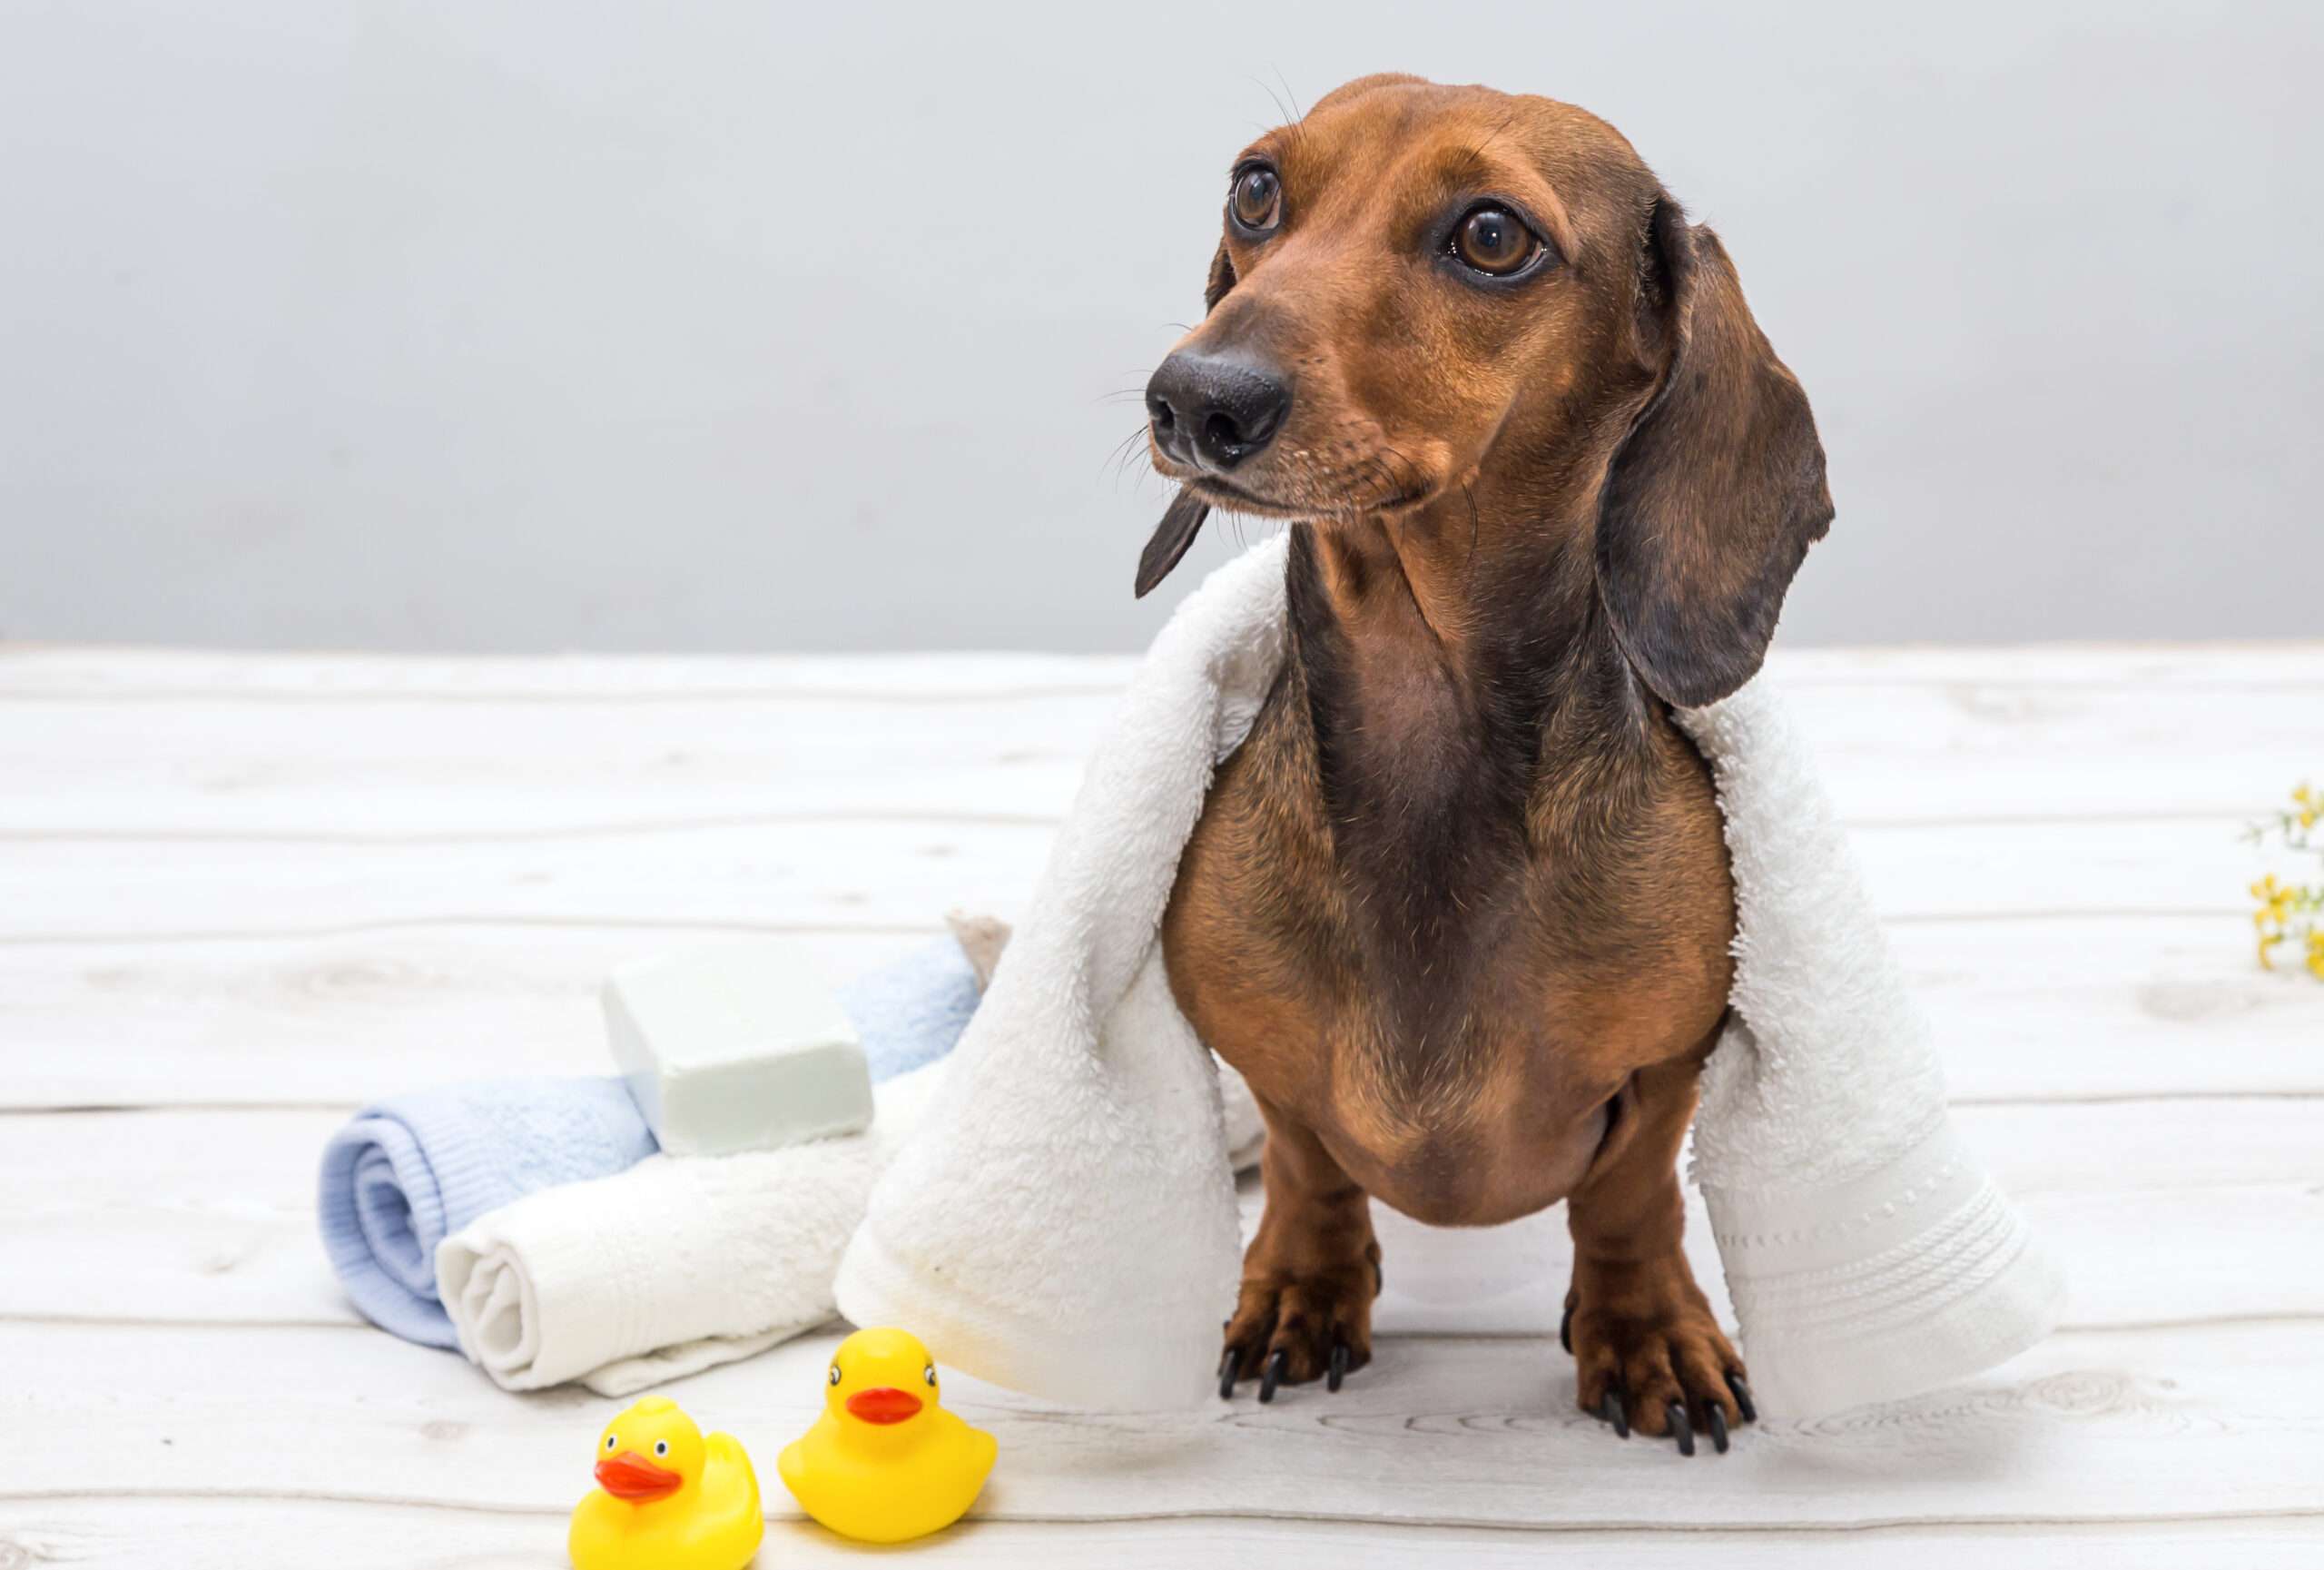 Donations - a tan smooth haired dachshund swathed in a towel